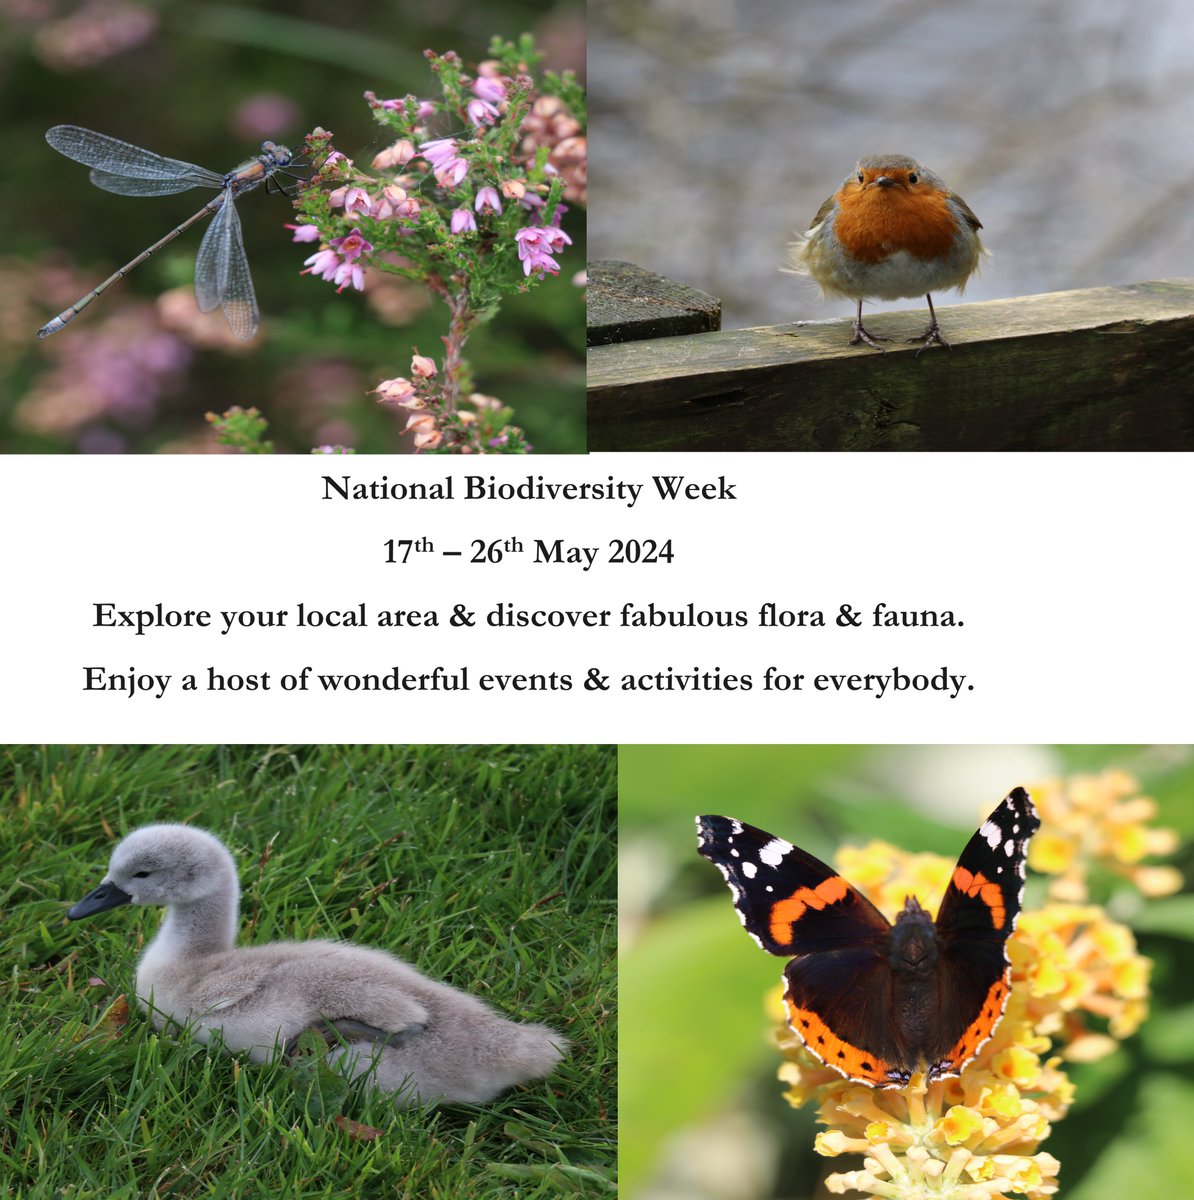 #NationalBiodiversityWeek It's about connecting people with nature & encouraging them to explore & discover the fabulous flora & fauna in the local area. Could you play a part in protecting YOUR local #biodiversity ?